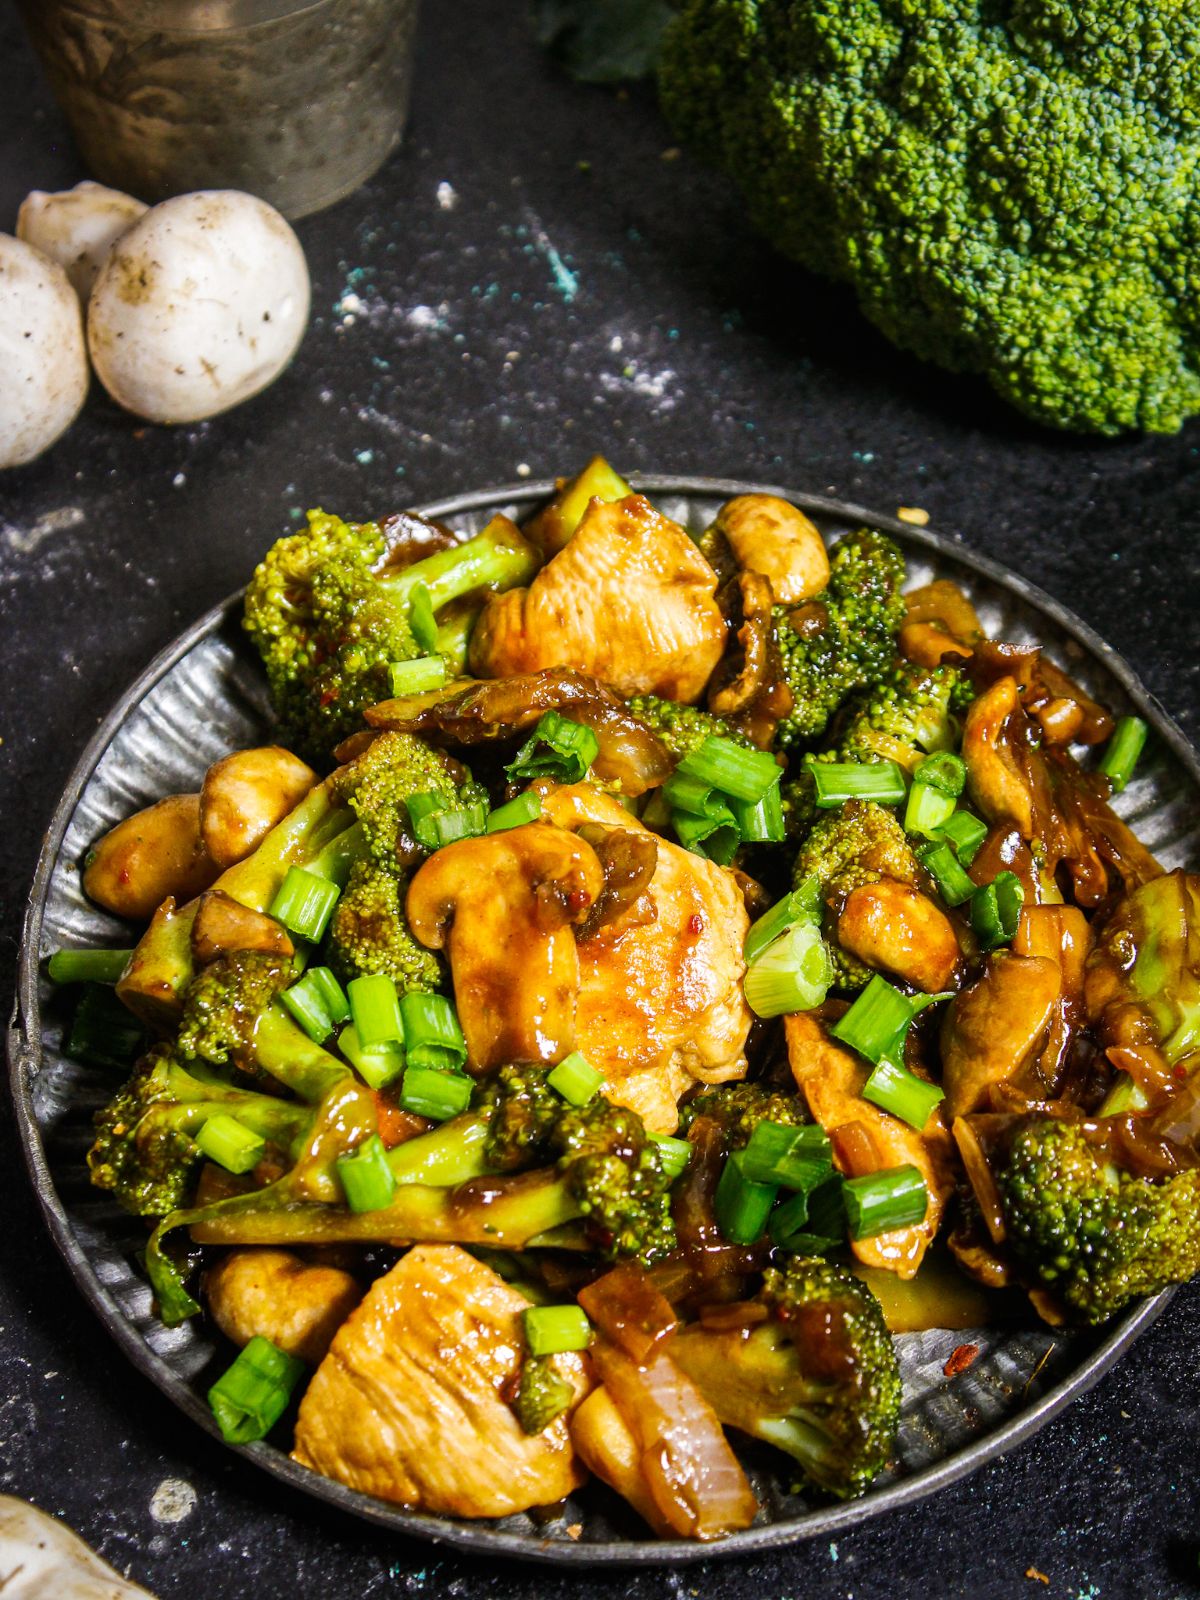 Chicken Broccoli Stir Fry served with main course 